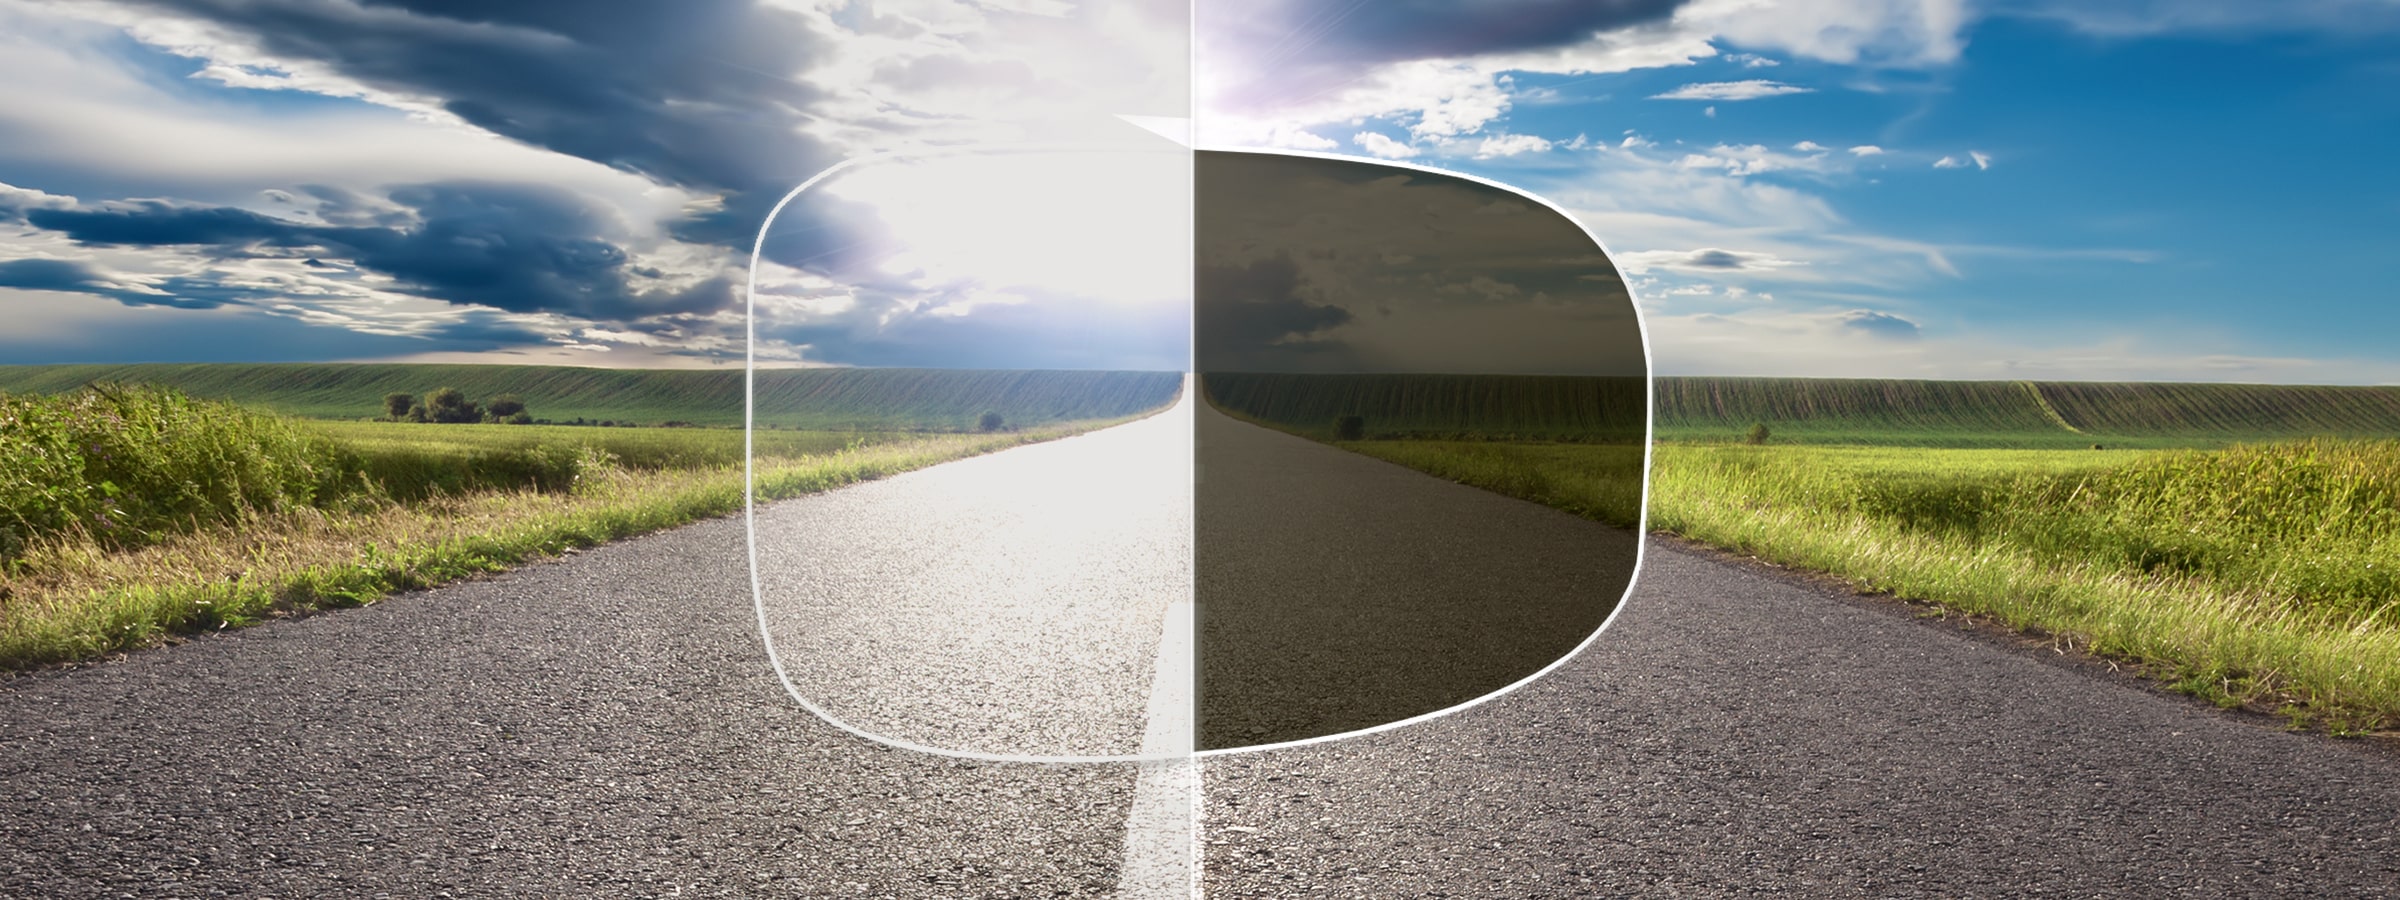 View of a country road through a lens with and without a polarised tint